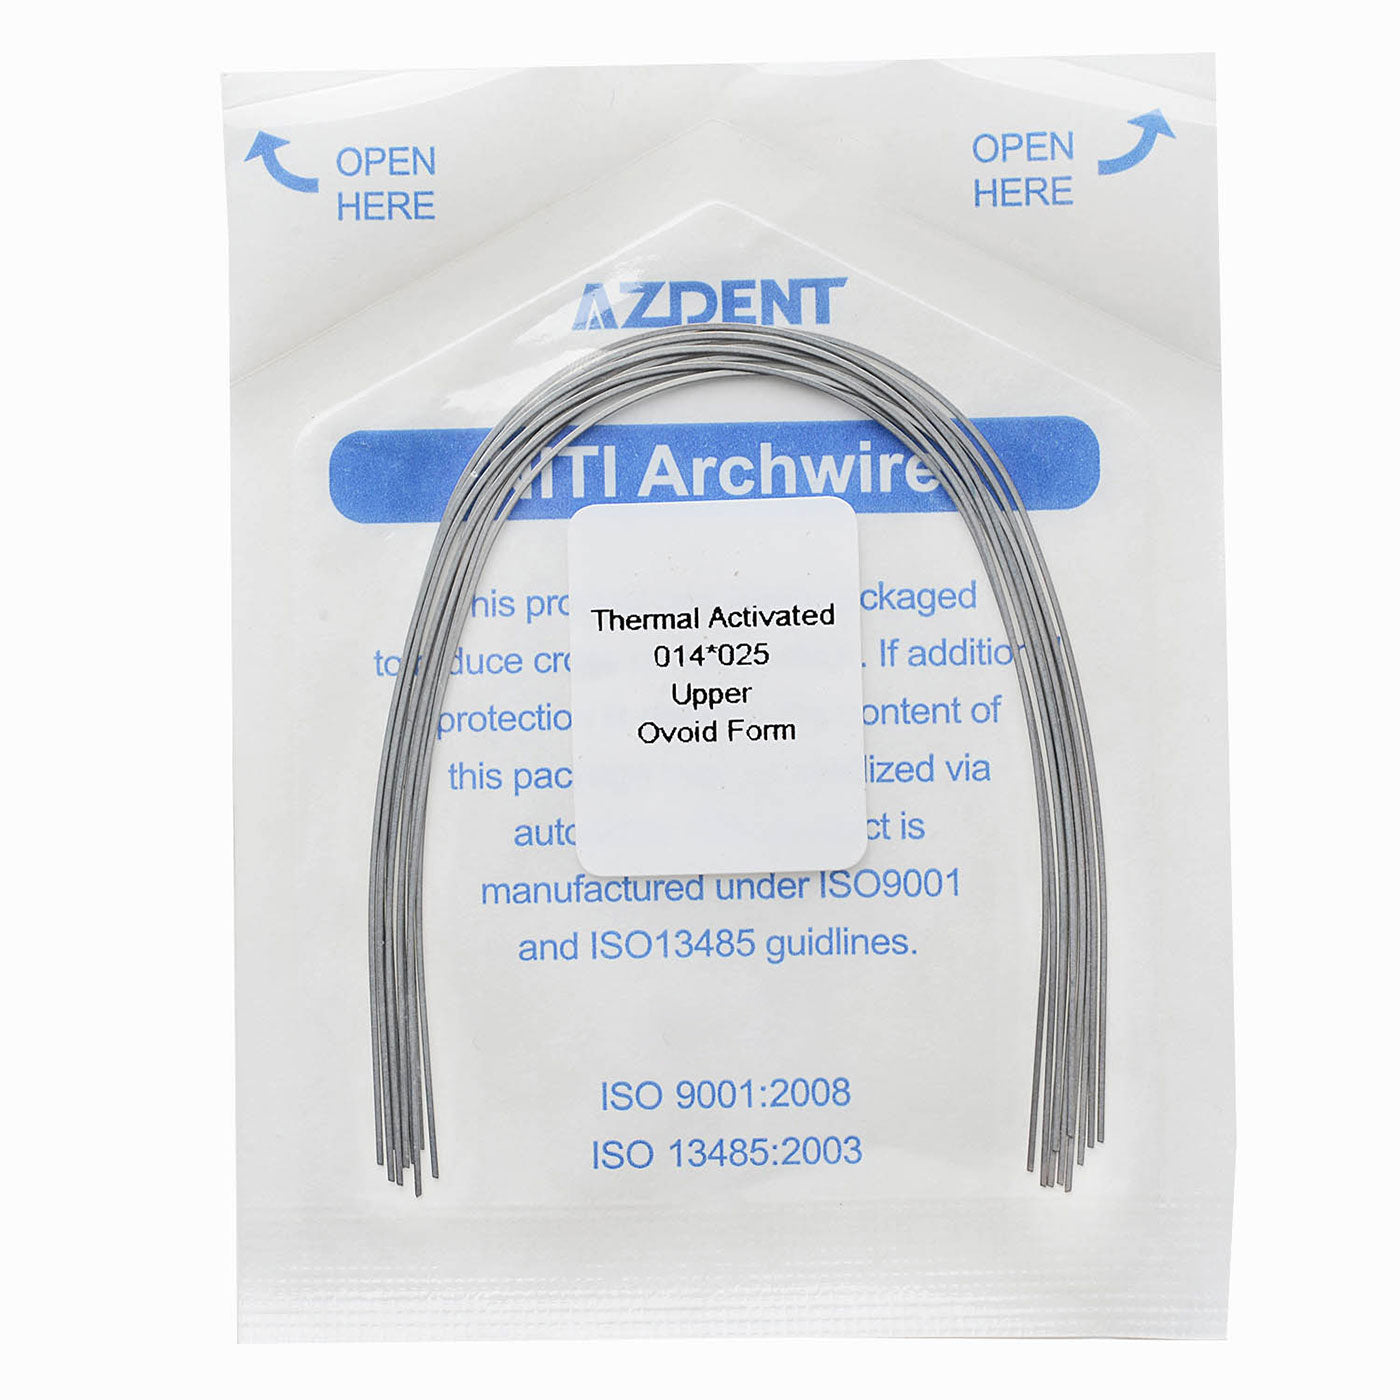 AZDENT Thermal Active NiTi Archwire Ovoid Form Rectangular 0.014 x 0.025 Upper 10pcs/Pack - azdentall.com